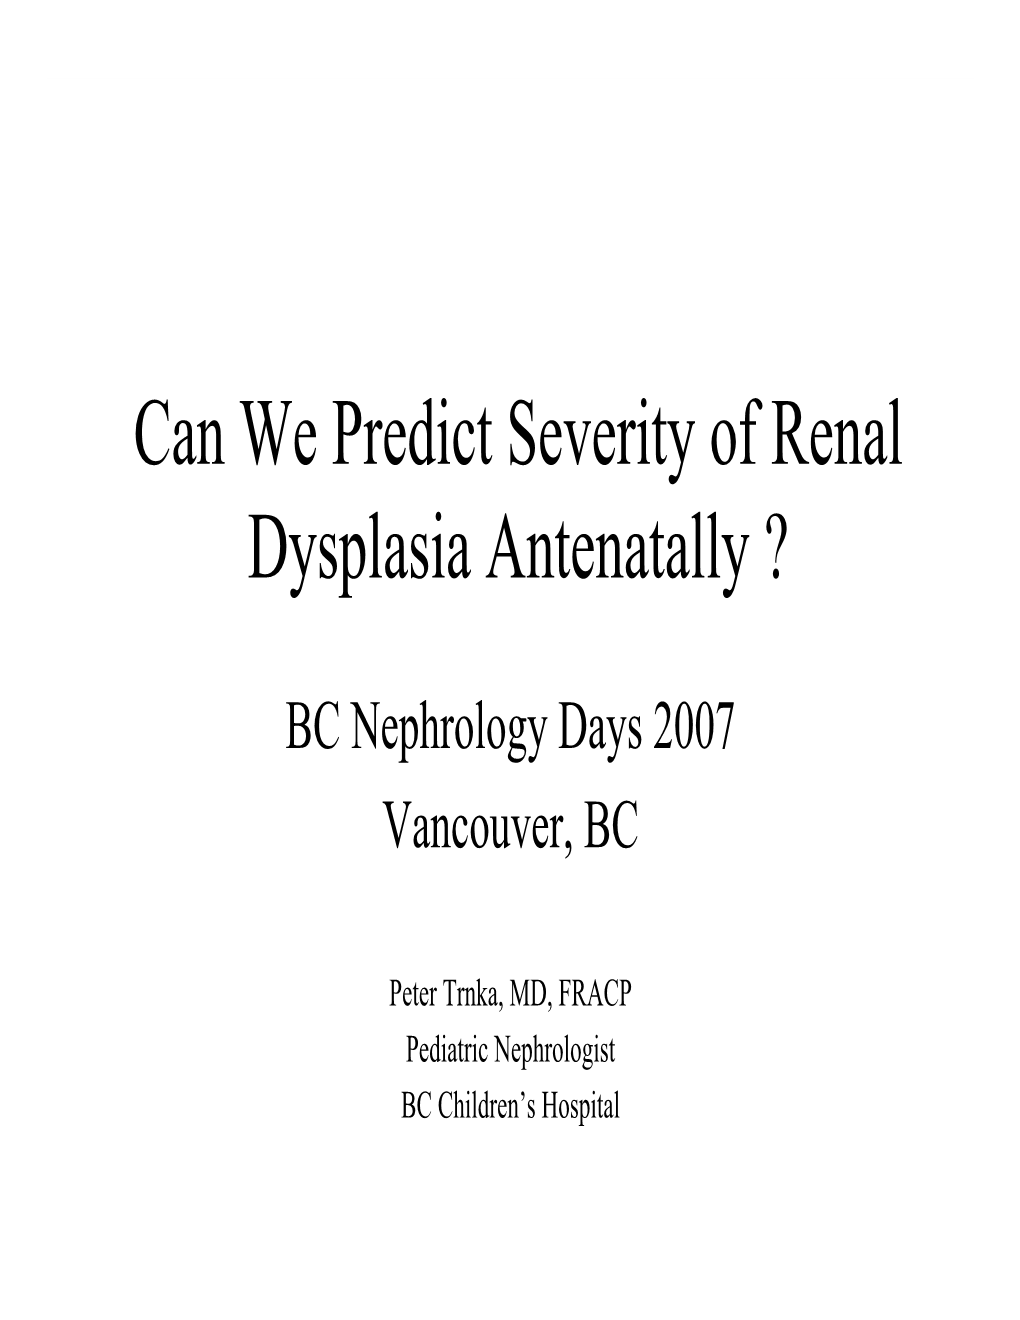 Can We Predict Severity of Renal Dysplasia Antenatally ?